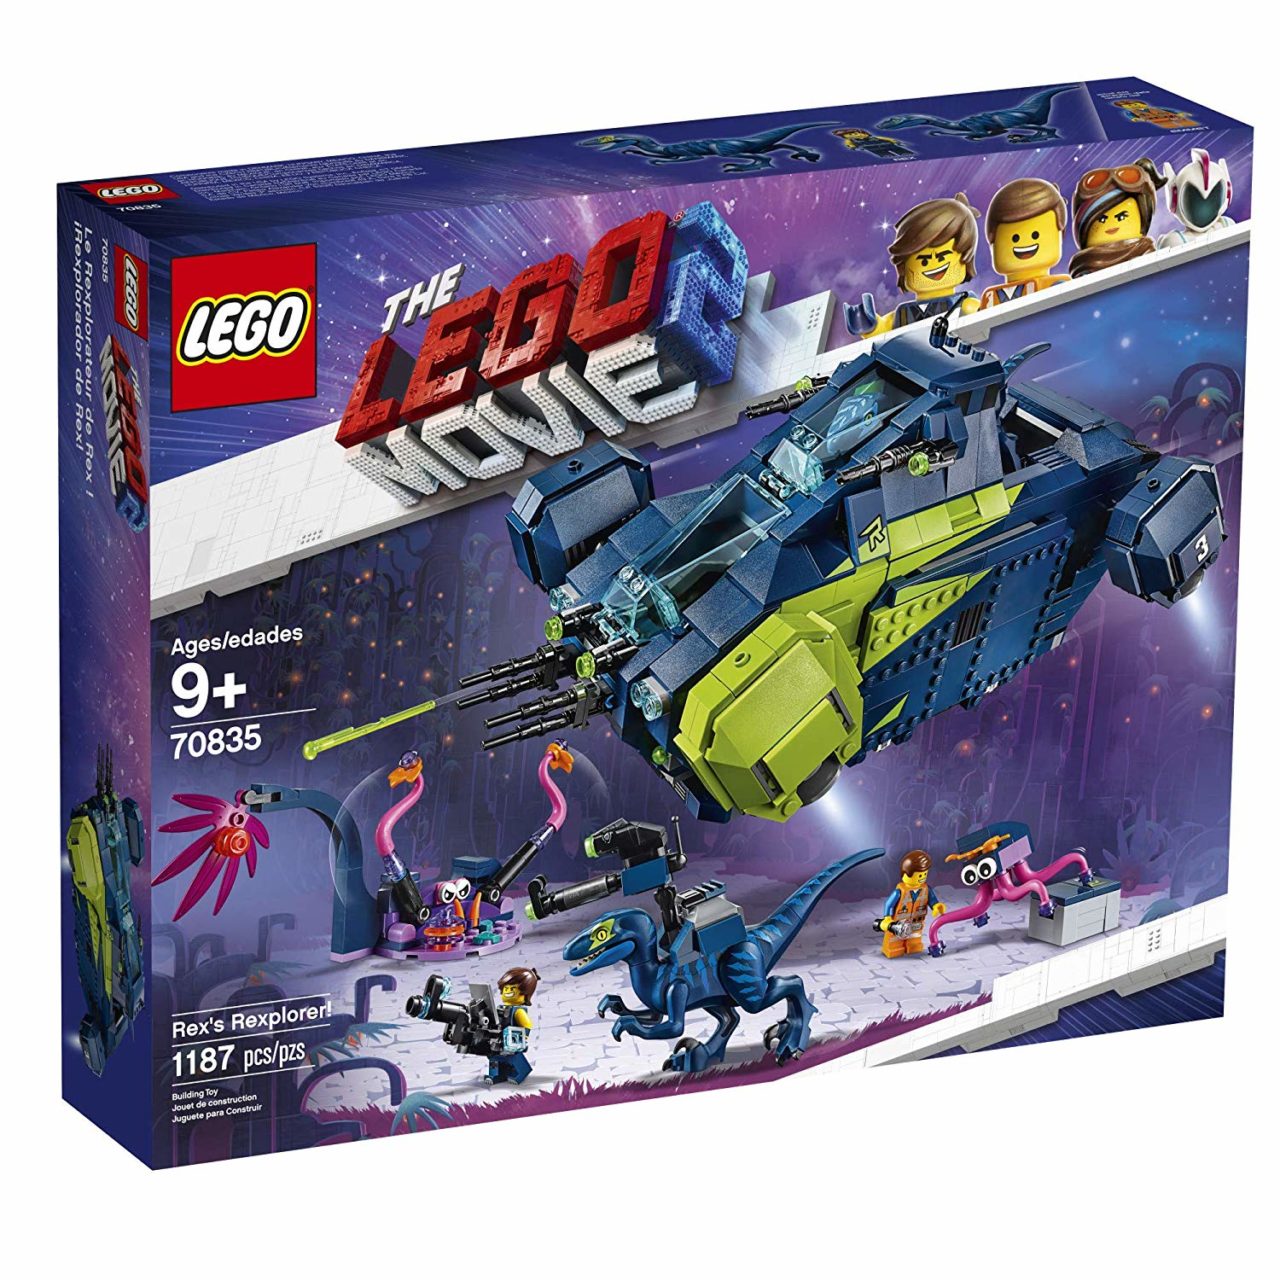 Some LEGO Movie 2 Sets Are Also Heavily Discounted - FBTB